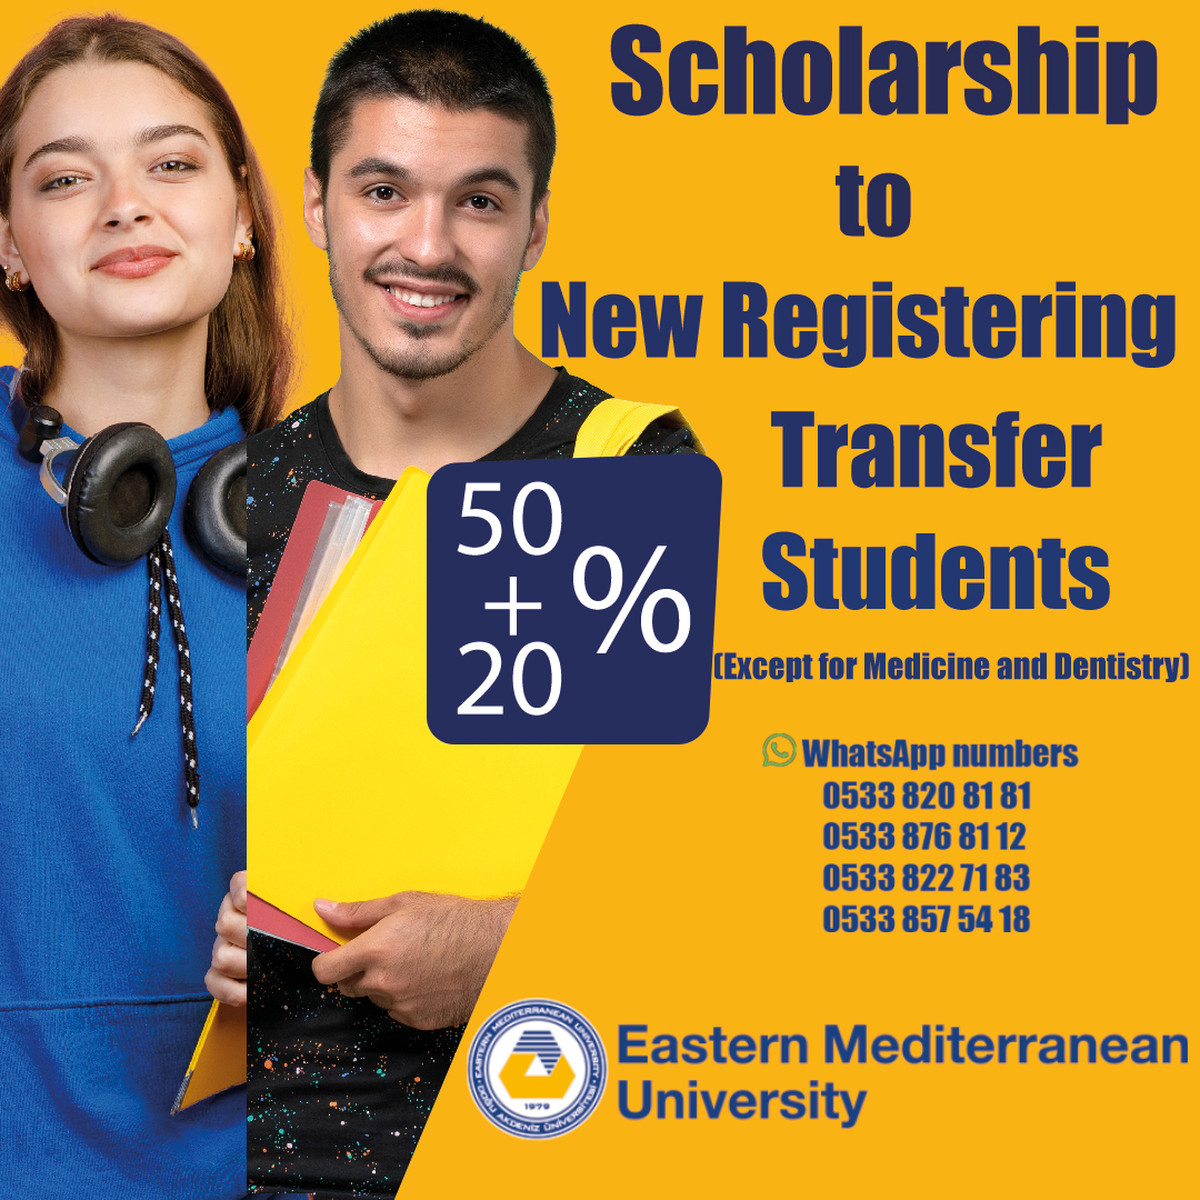 Scholarships to New Registering Transfer Students